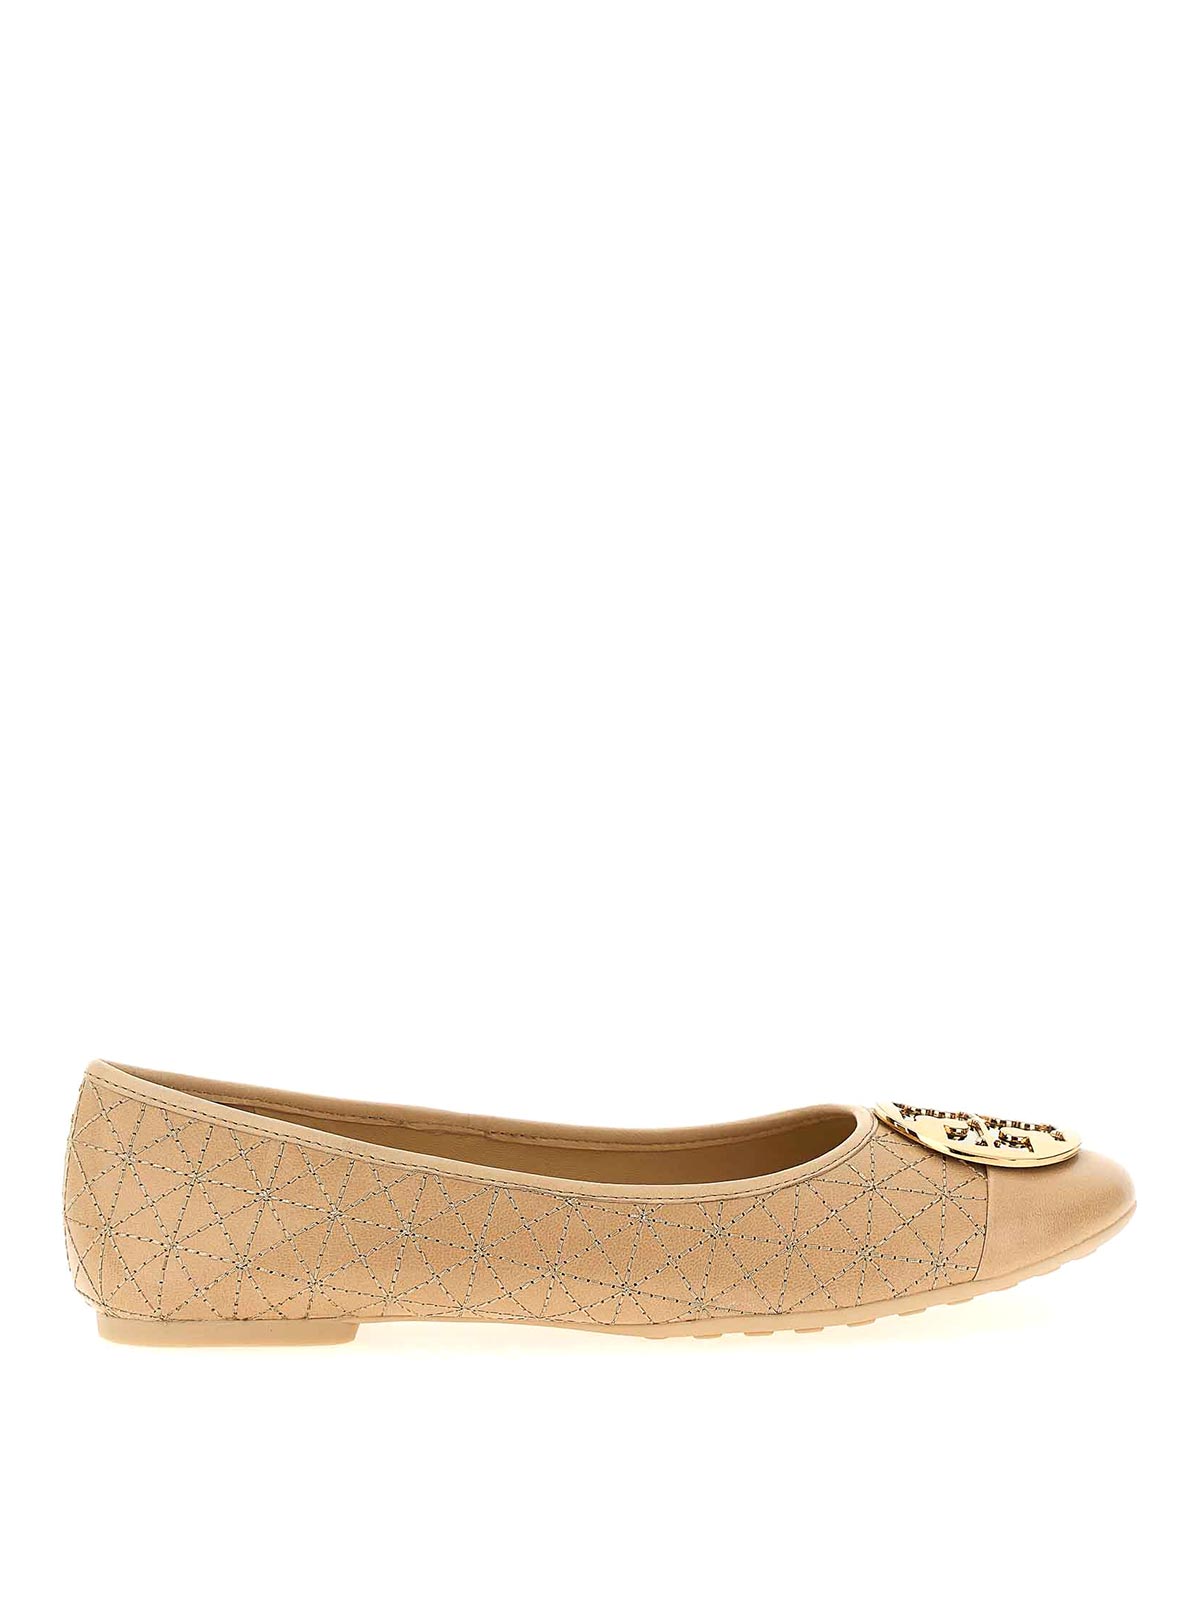 TORY BURCH CLAIRE QUILTED BALLET FLATS